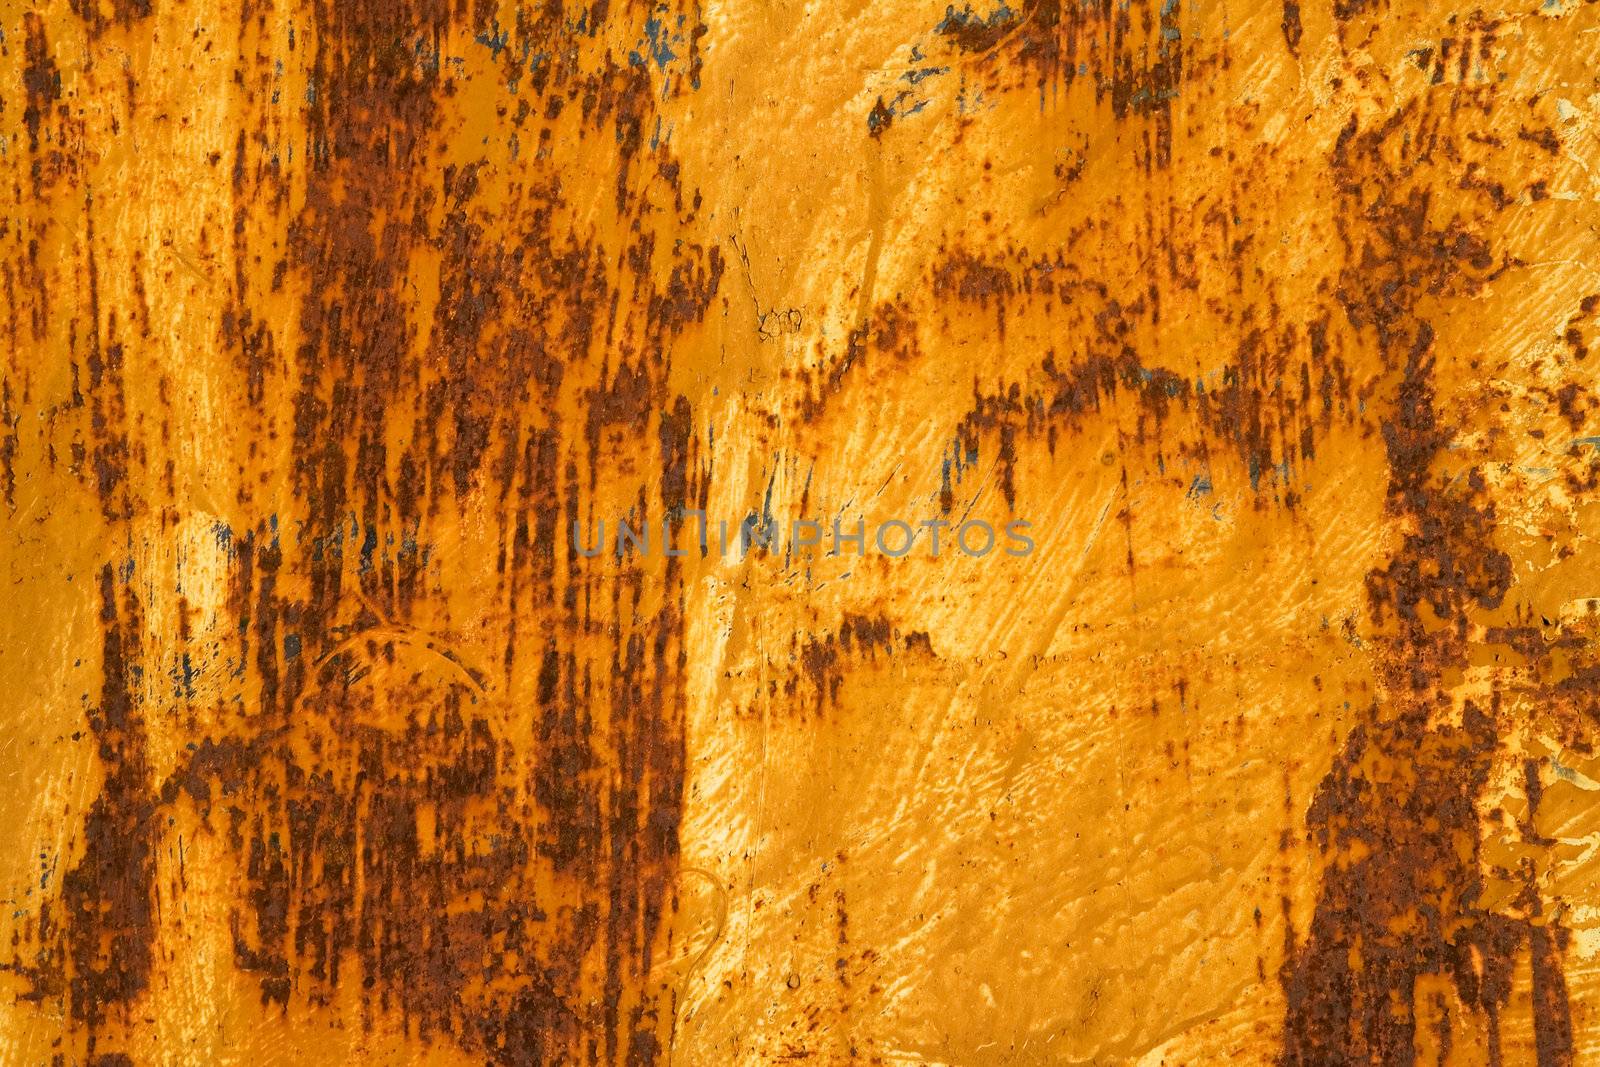 Photo of the texture of rusty painted metal